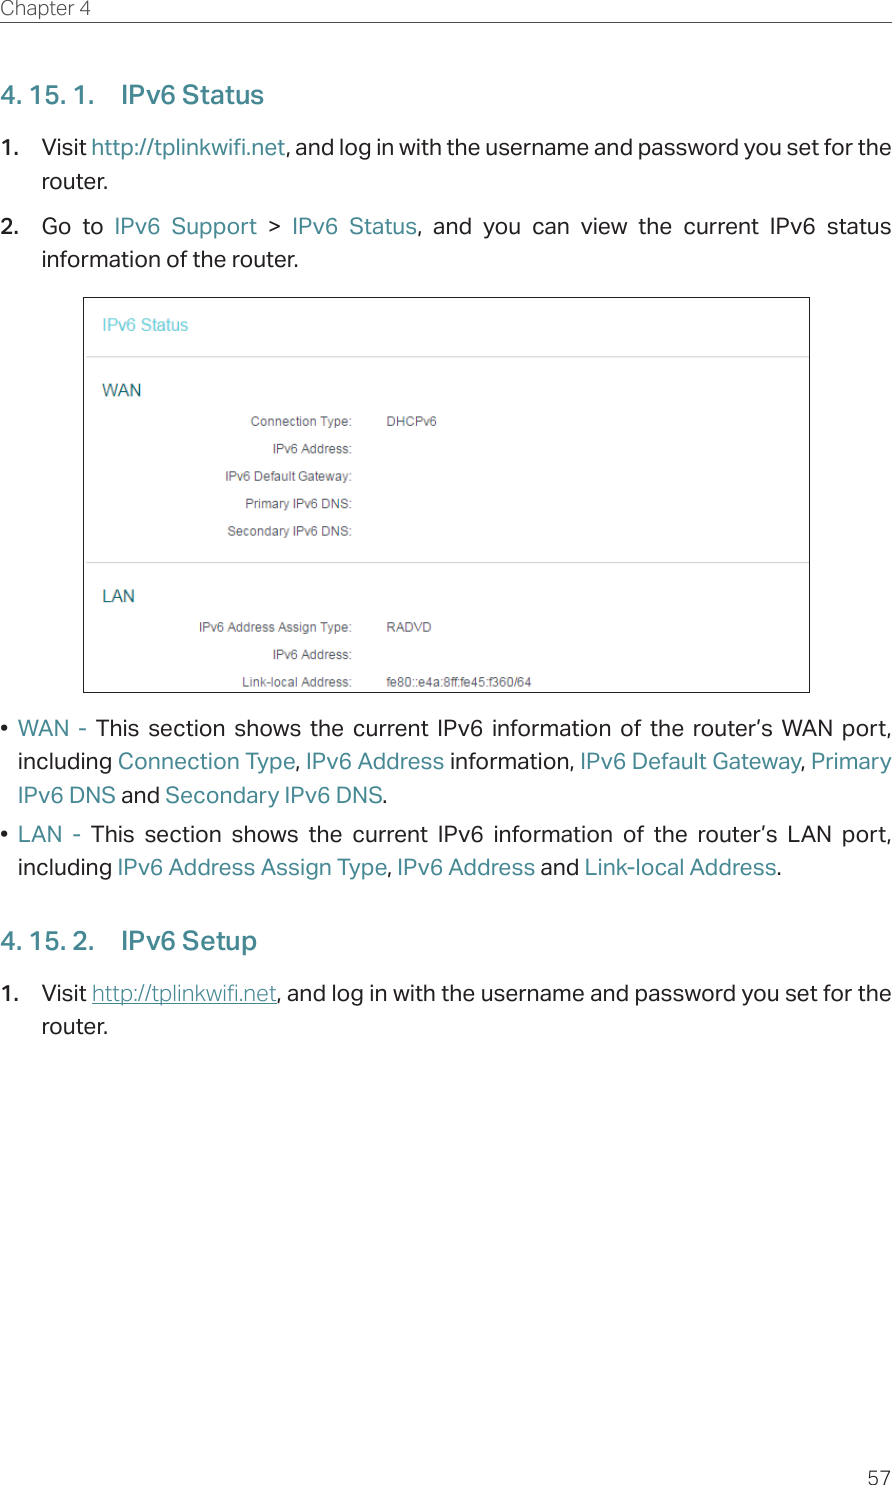 57Chapter 4  4. 15. 1.  IPv6 Status1.  Visit http://tplinkwifi.net, and log in with the username and password you set for the router.2.  Go to IPv6 Support &gt; IPv6 Status, and you can view the current IPv6 status information of the router.•  WAN - This section shows the current IPv6 information of the router’s WAN port, including Connection Type, IPv6 Address information, IPv6 Default Gateway, Primary IPv6 DNS and Secondary IPv6 DNS.•  LAN - This section shows the current IPv6 information of the router’s LAN port, including IPv6 Address Assign Type, IPv6 Address and Link-local Address.4. 15. 2.  IPv6 Setup1.  Visit http://tplinkwifi.net, and log in with the username and password you set for the router.